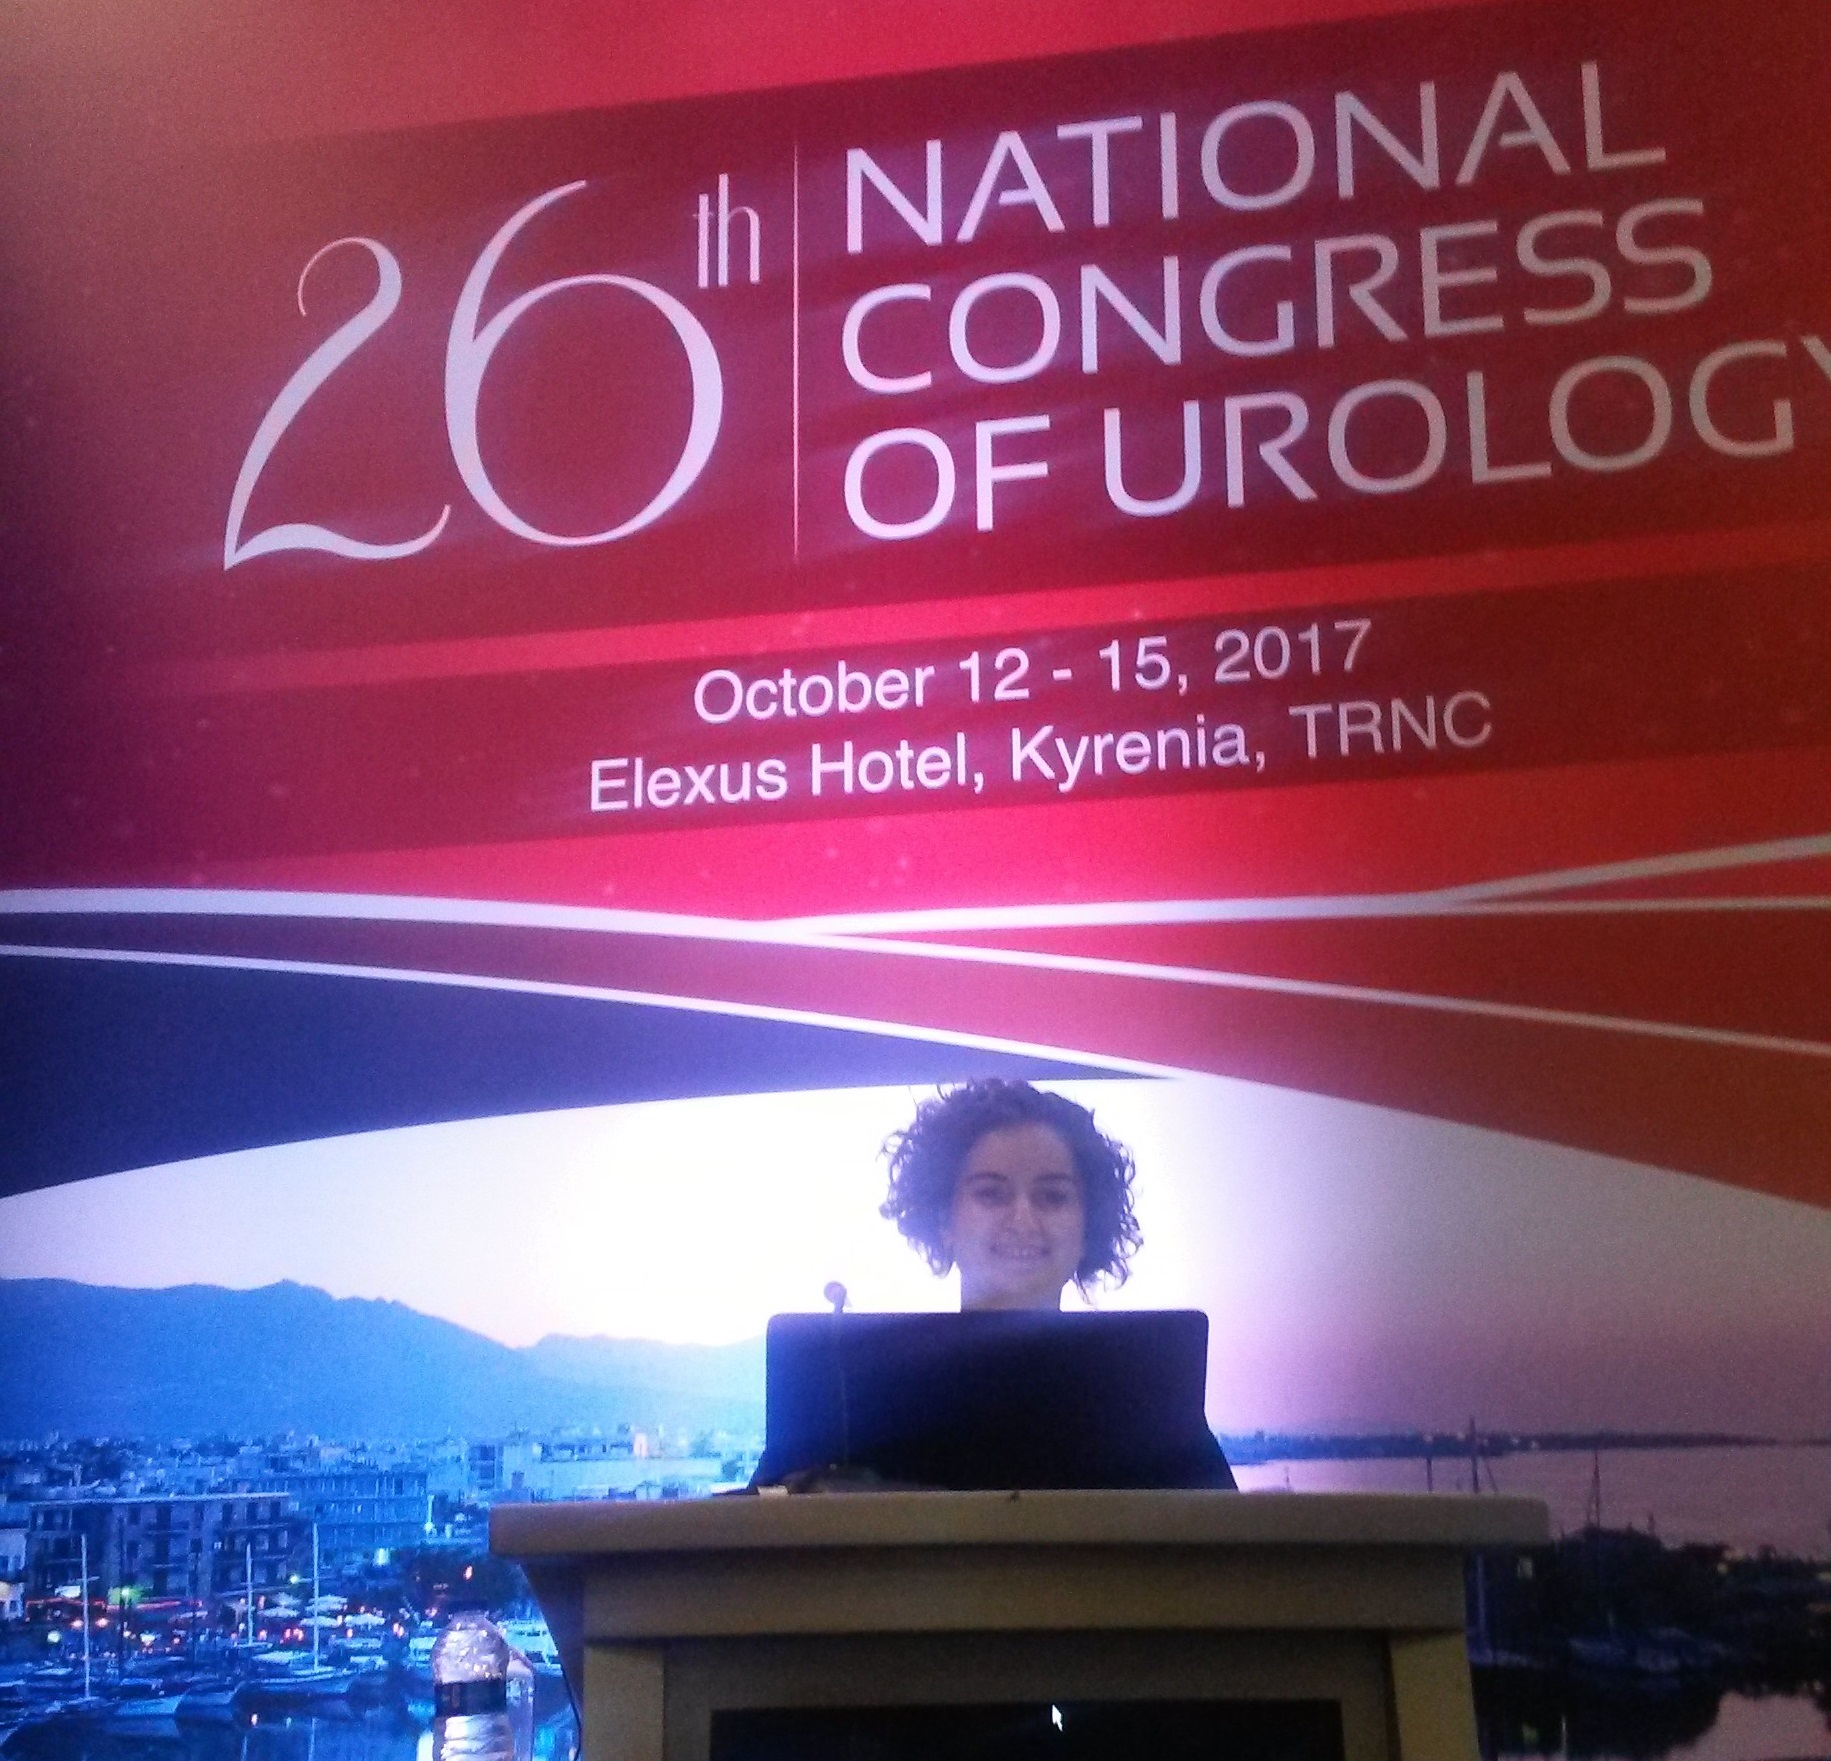 Near East University Department of Nursing has been represented at the National Urology Congress